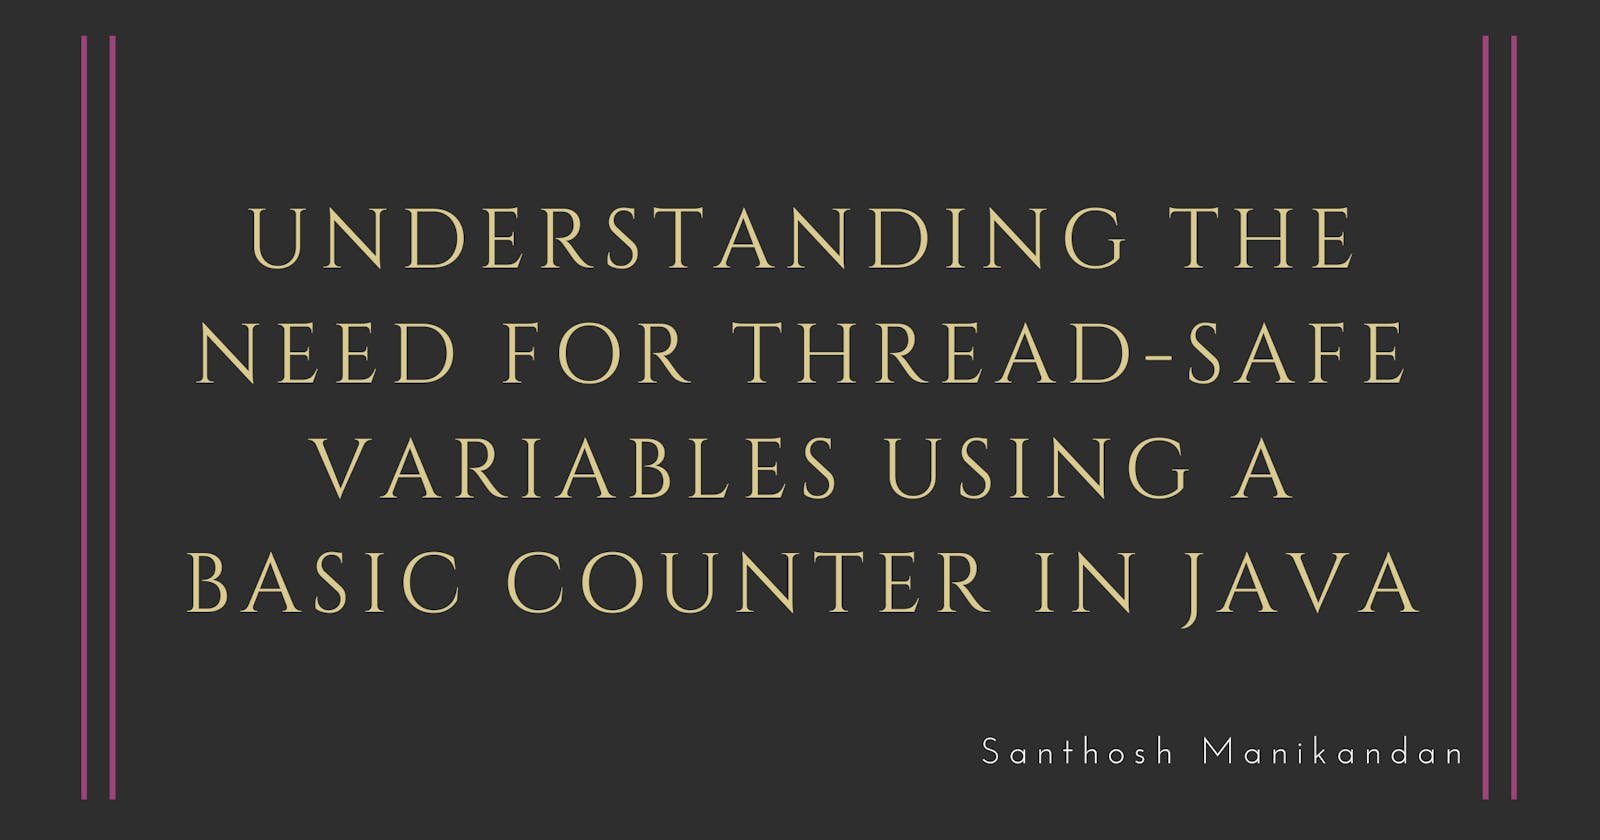 Understanding the need for Thread-Safe variables using a basic counter in Java